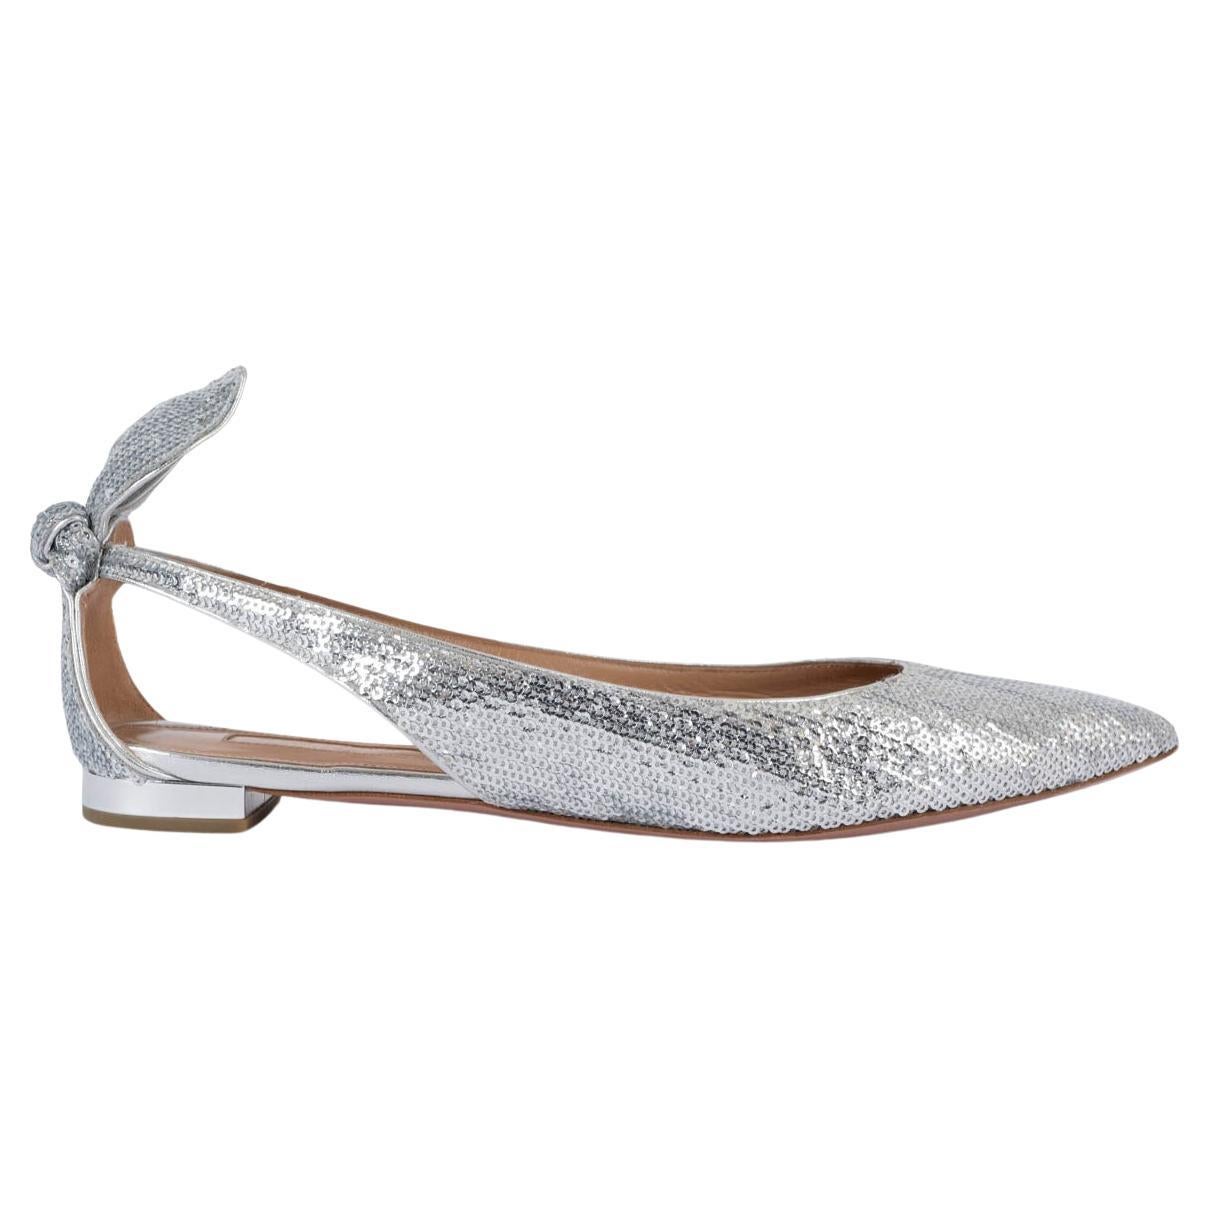 AQUAZZURA silver BOW TIE SEQUIN EMBELLISHED Flats Shoes 39 For Sale